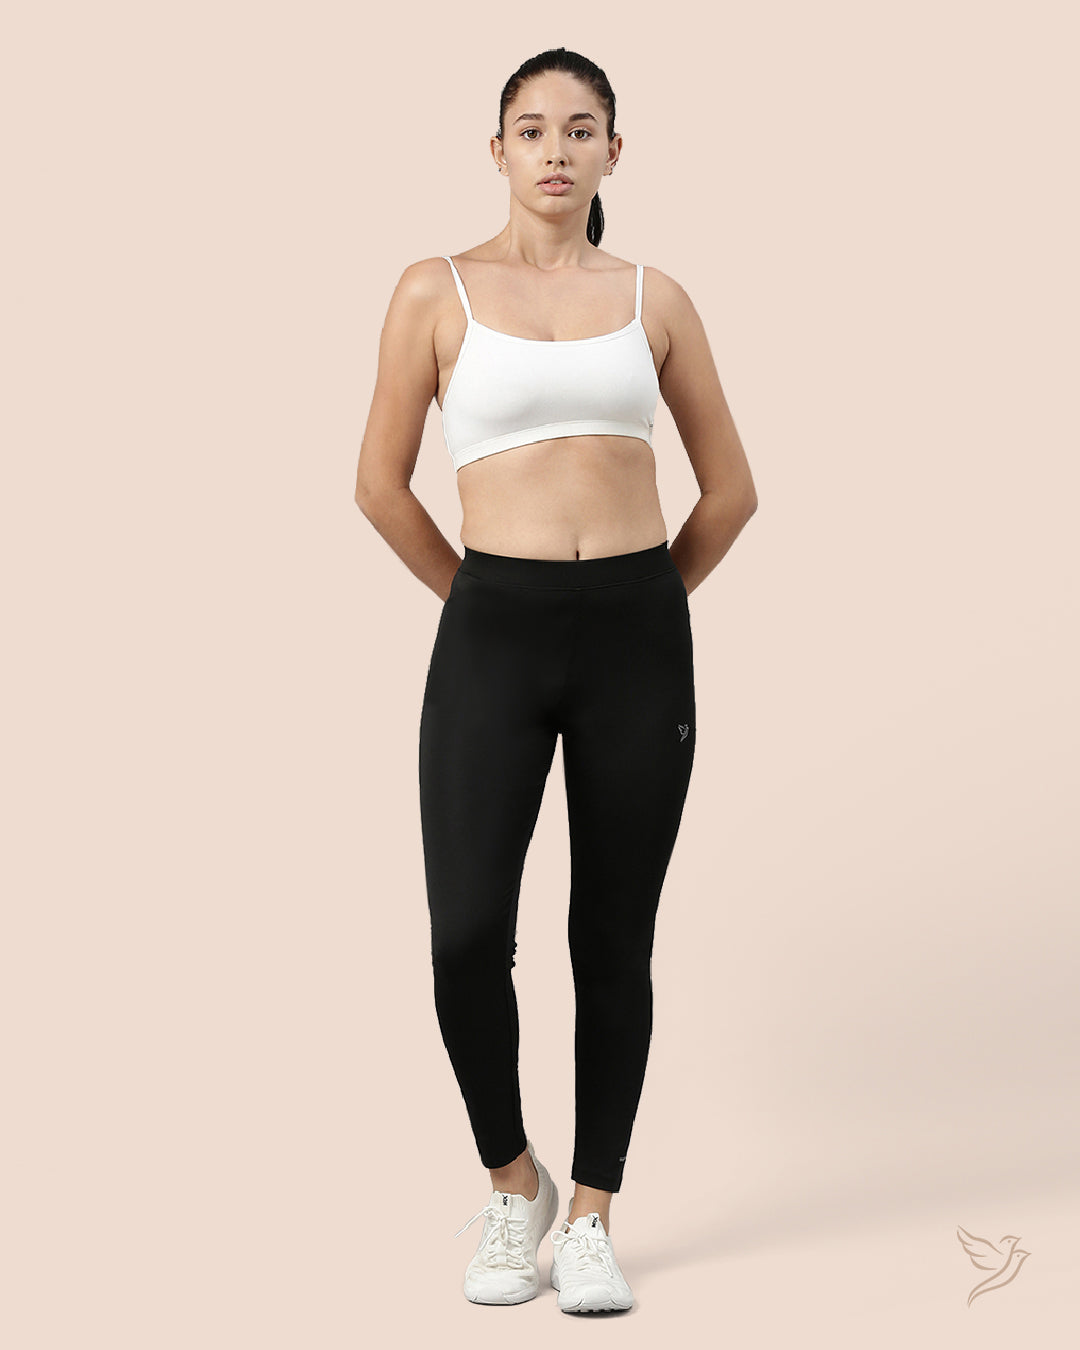 Twin Birds Online - Hit any fitness workout confidently with Twin Birds  mid-waist performance legging. Shop our newest performance wear collections  @ www.twinbirds.co.in #active #activewear #activewearfashion  #activewearforwomen #performance